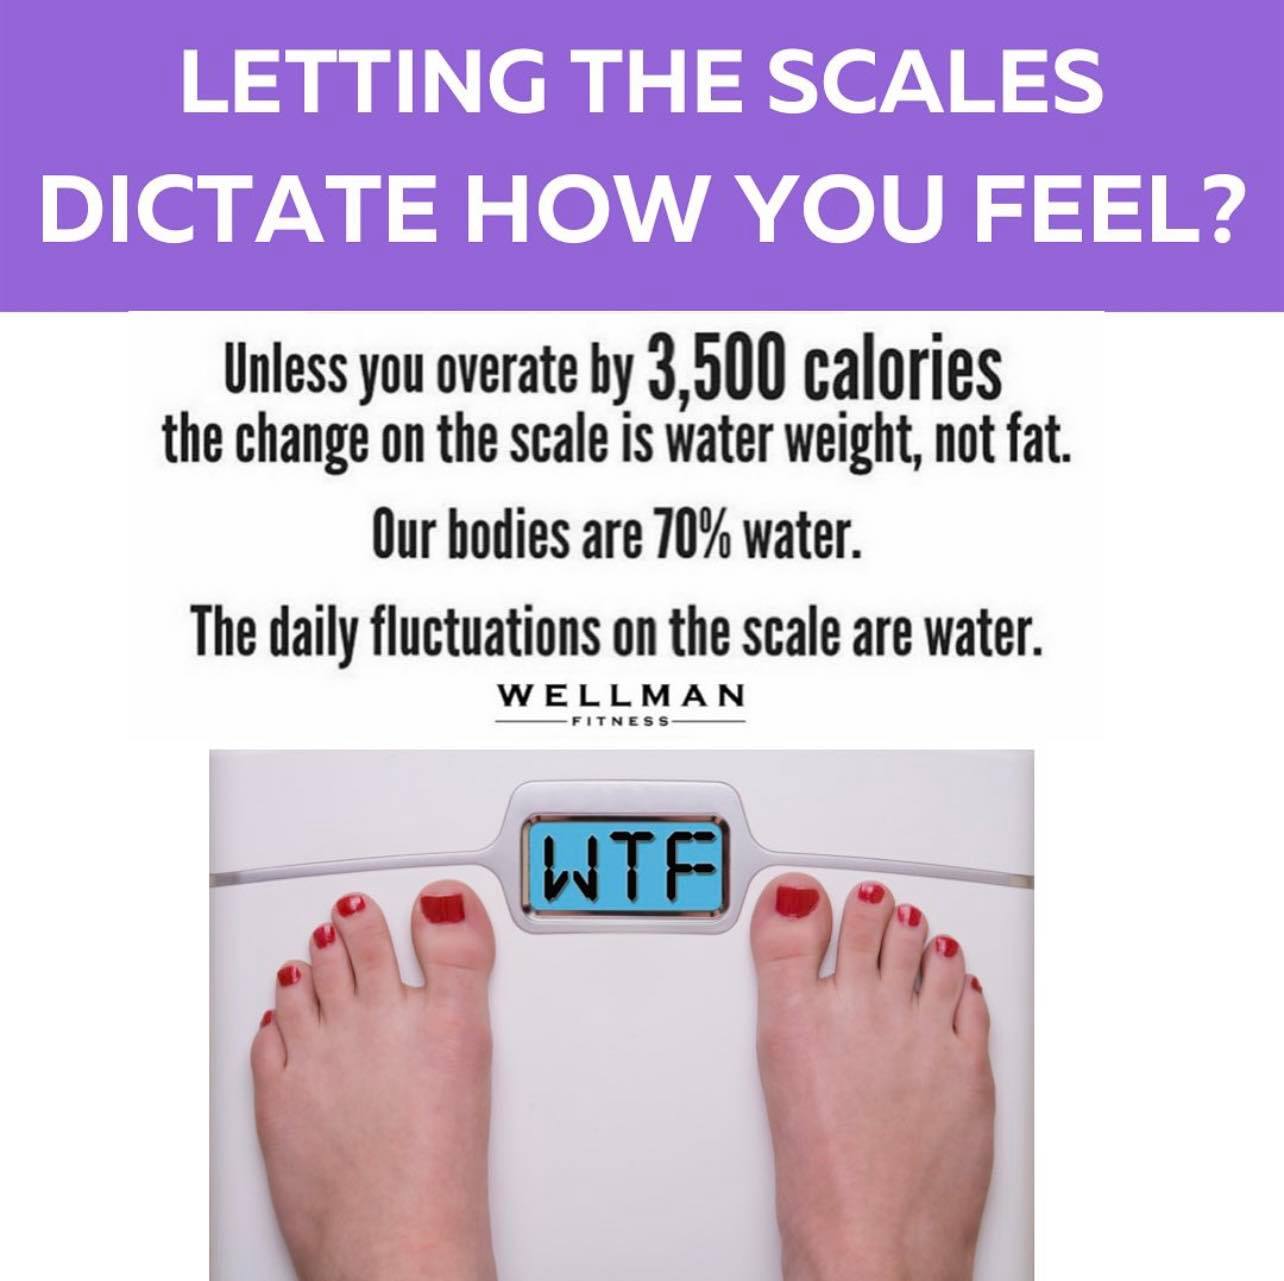 Weight fluctuation: How much does weight change?